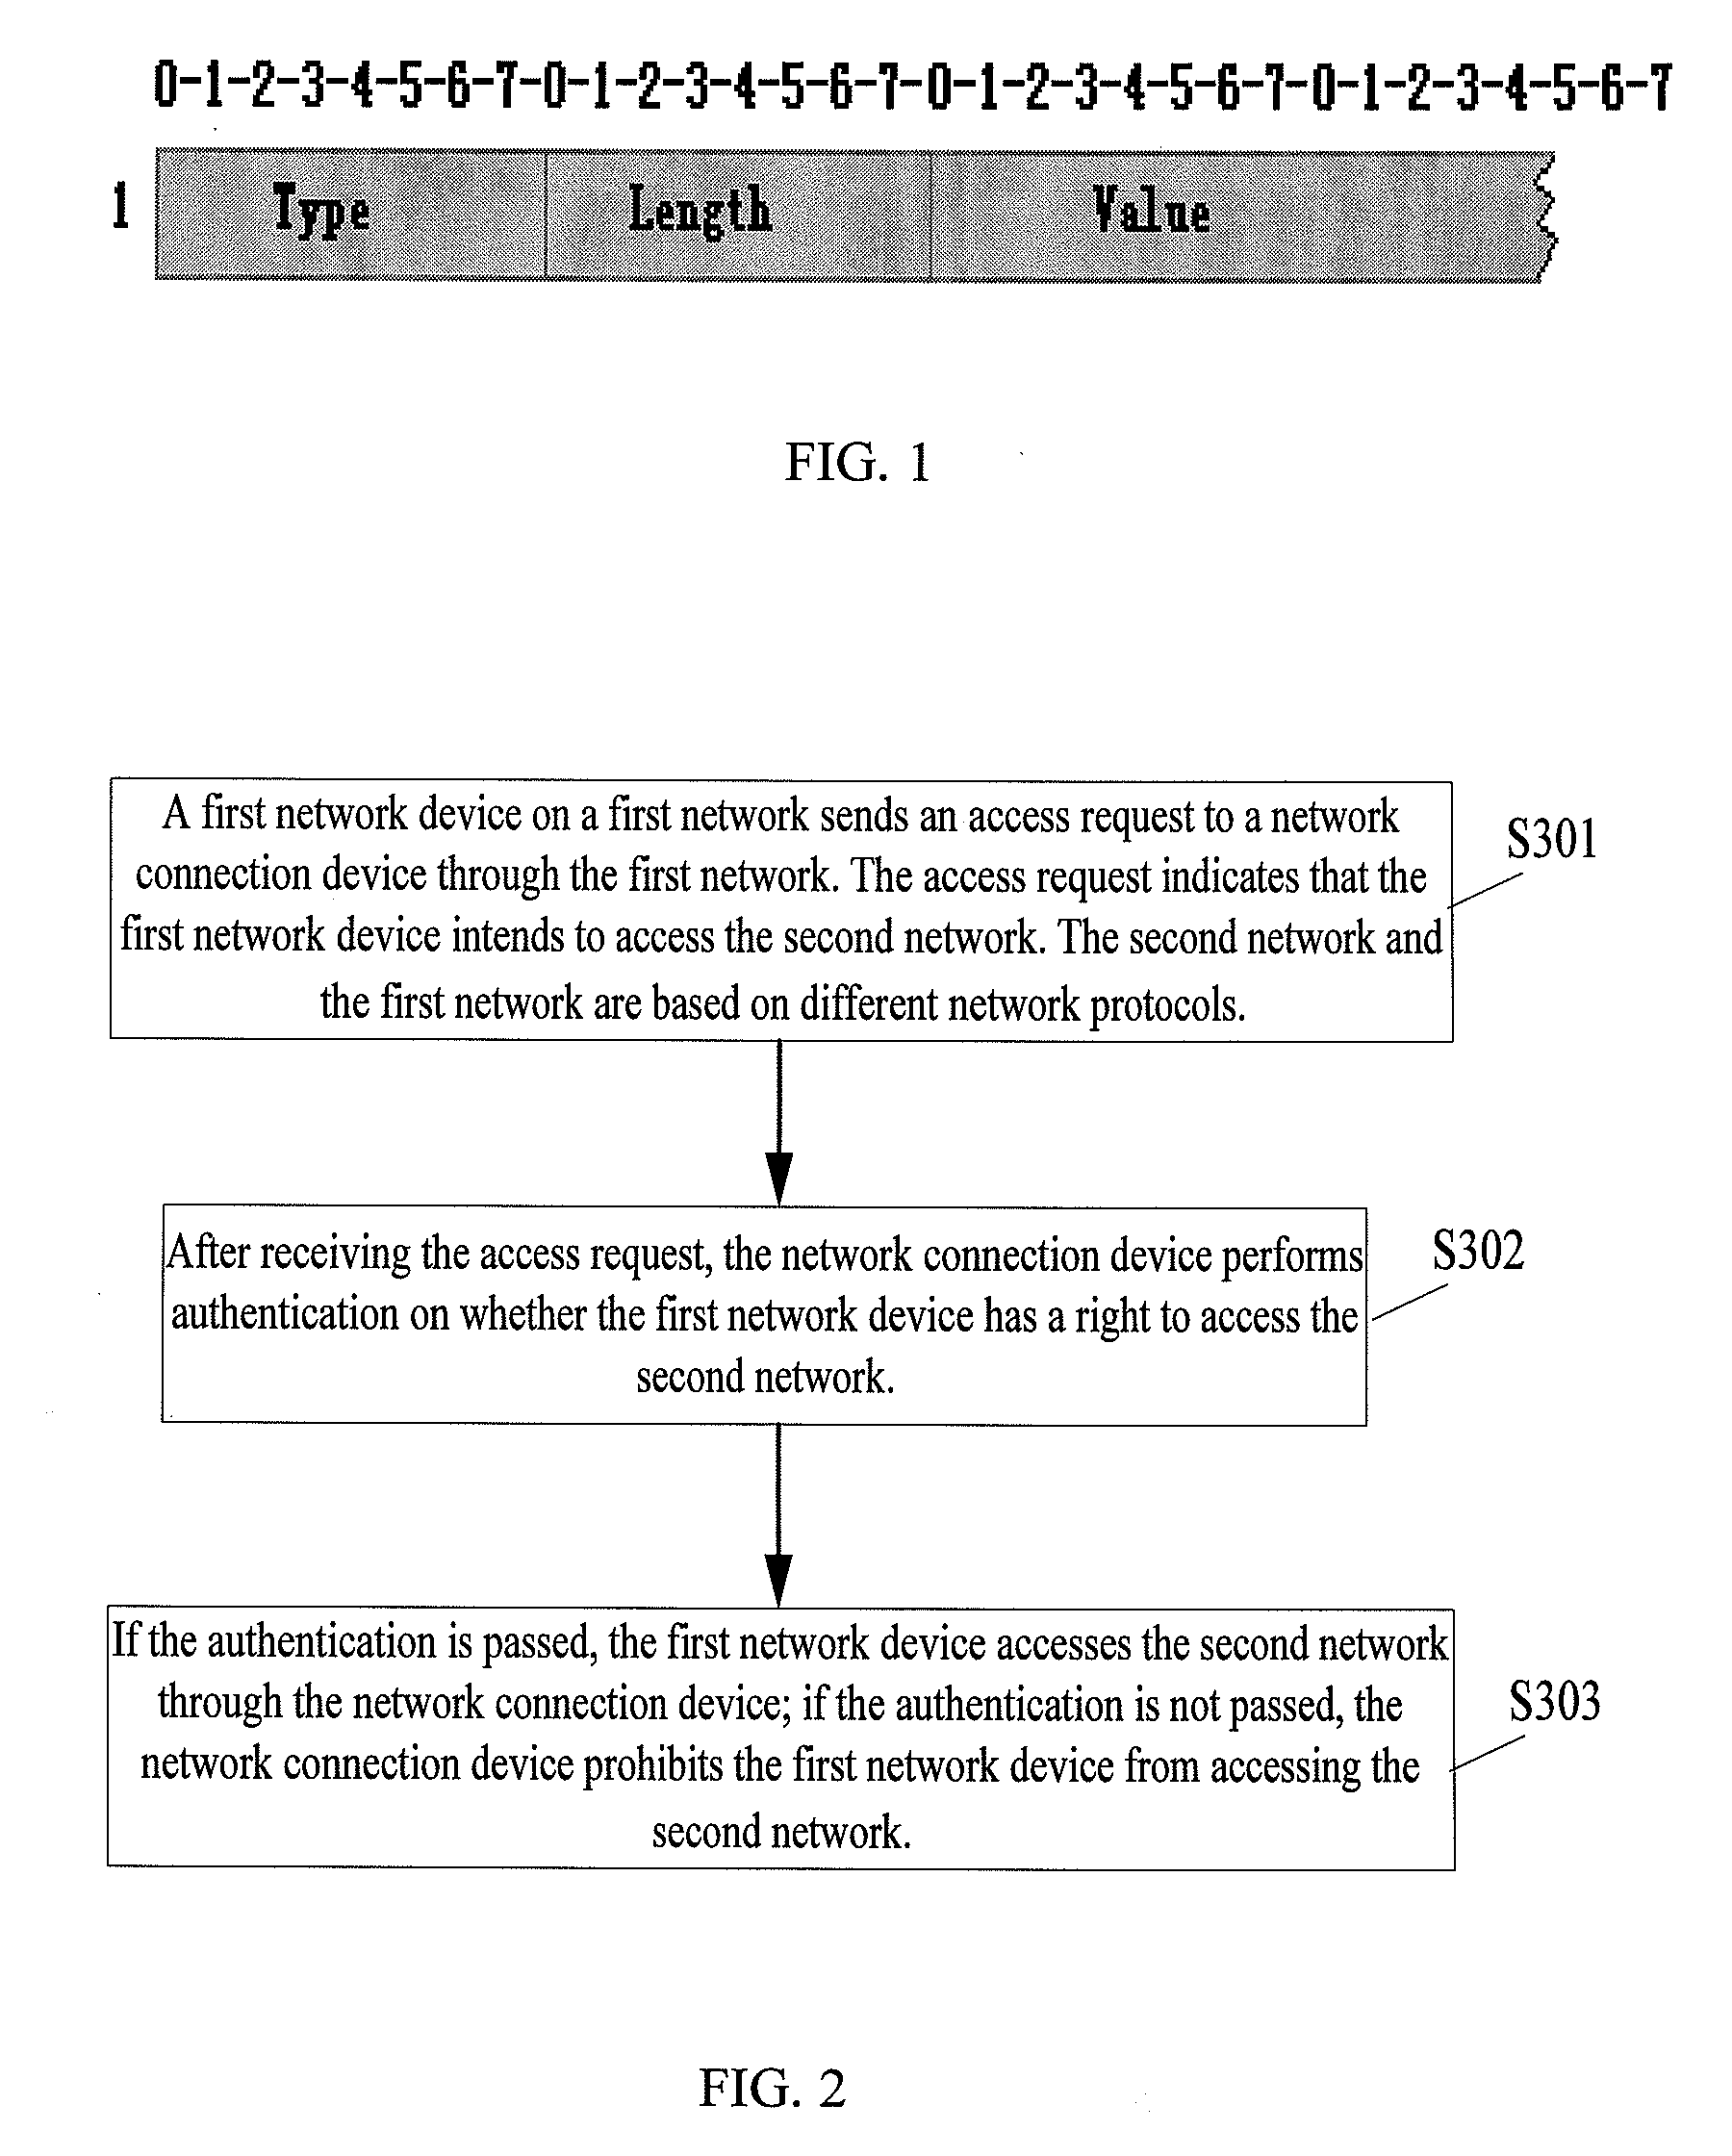 Method and system for network access and network connection device